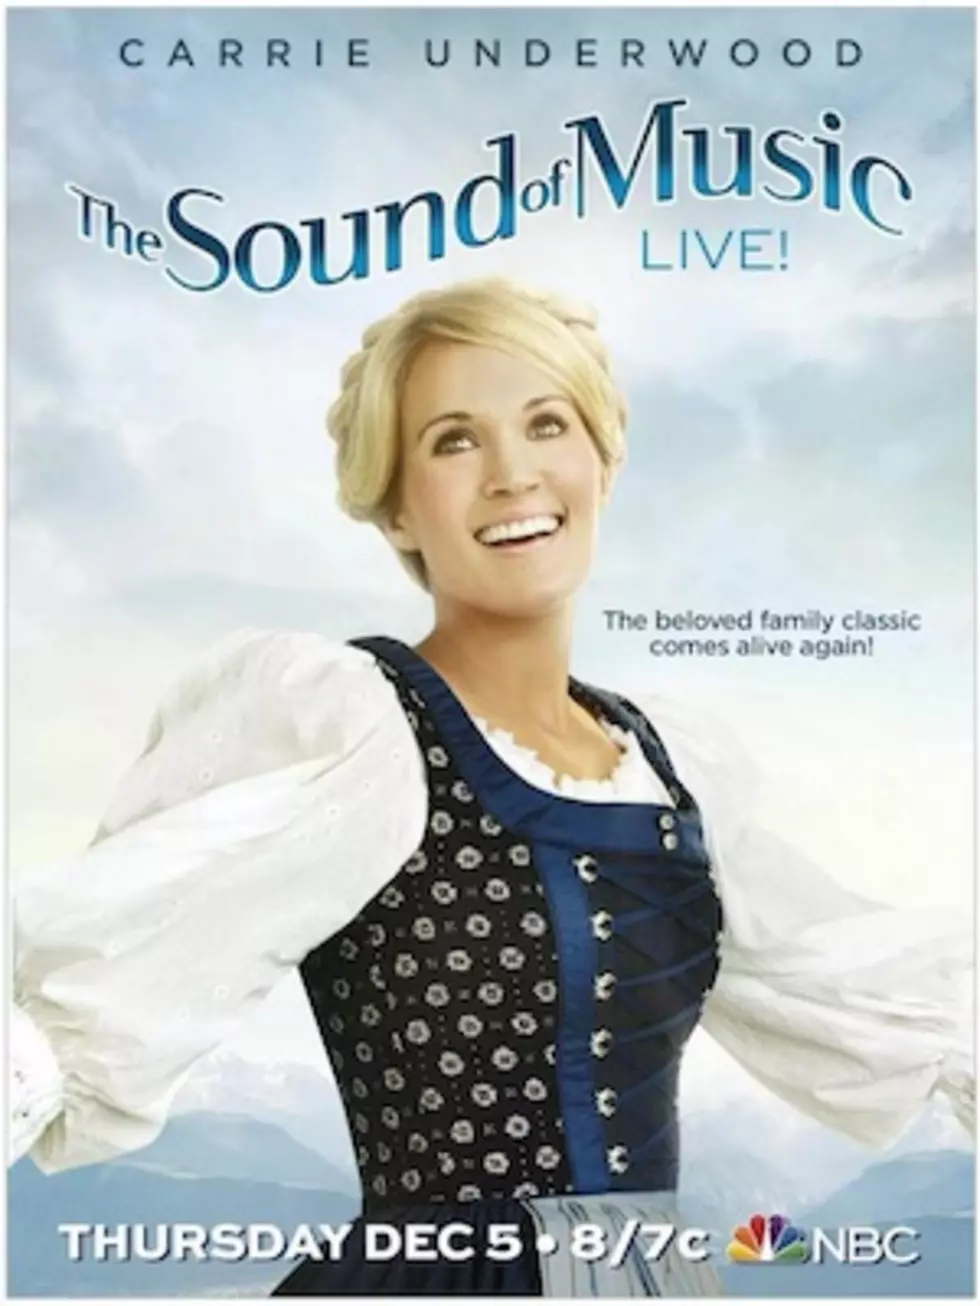 New Details About Carrie Underwood&#8217;s &#8216;The Sound of Music&#8217; Set Emerge